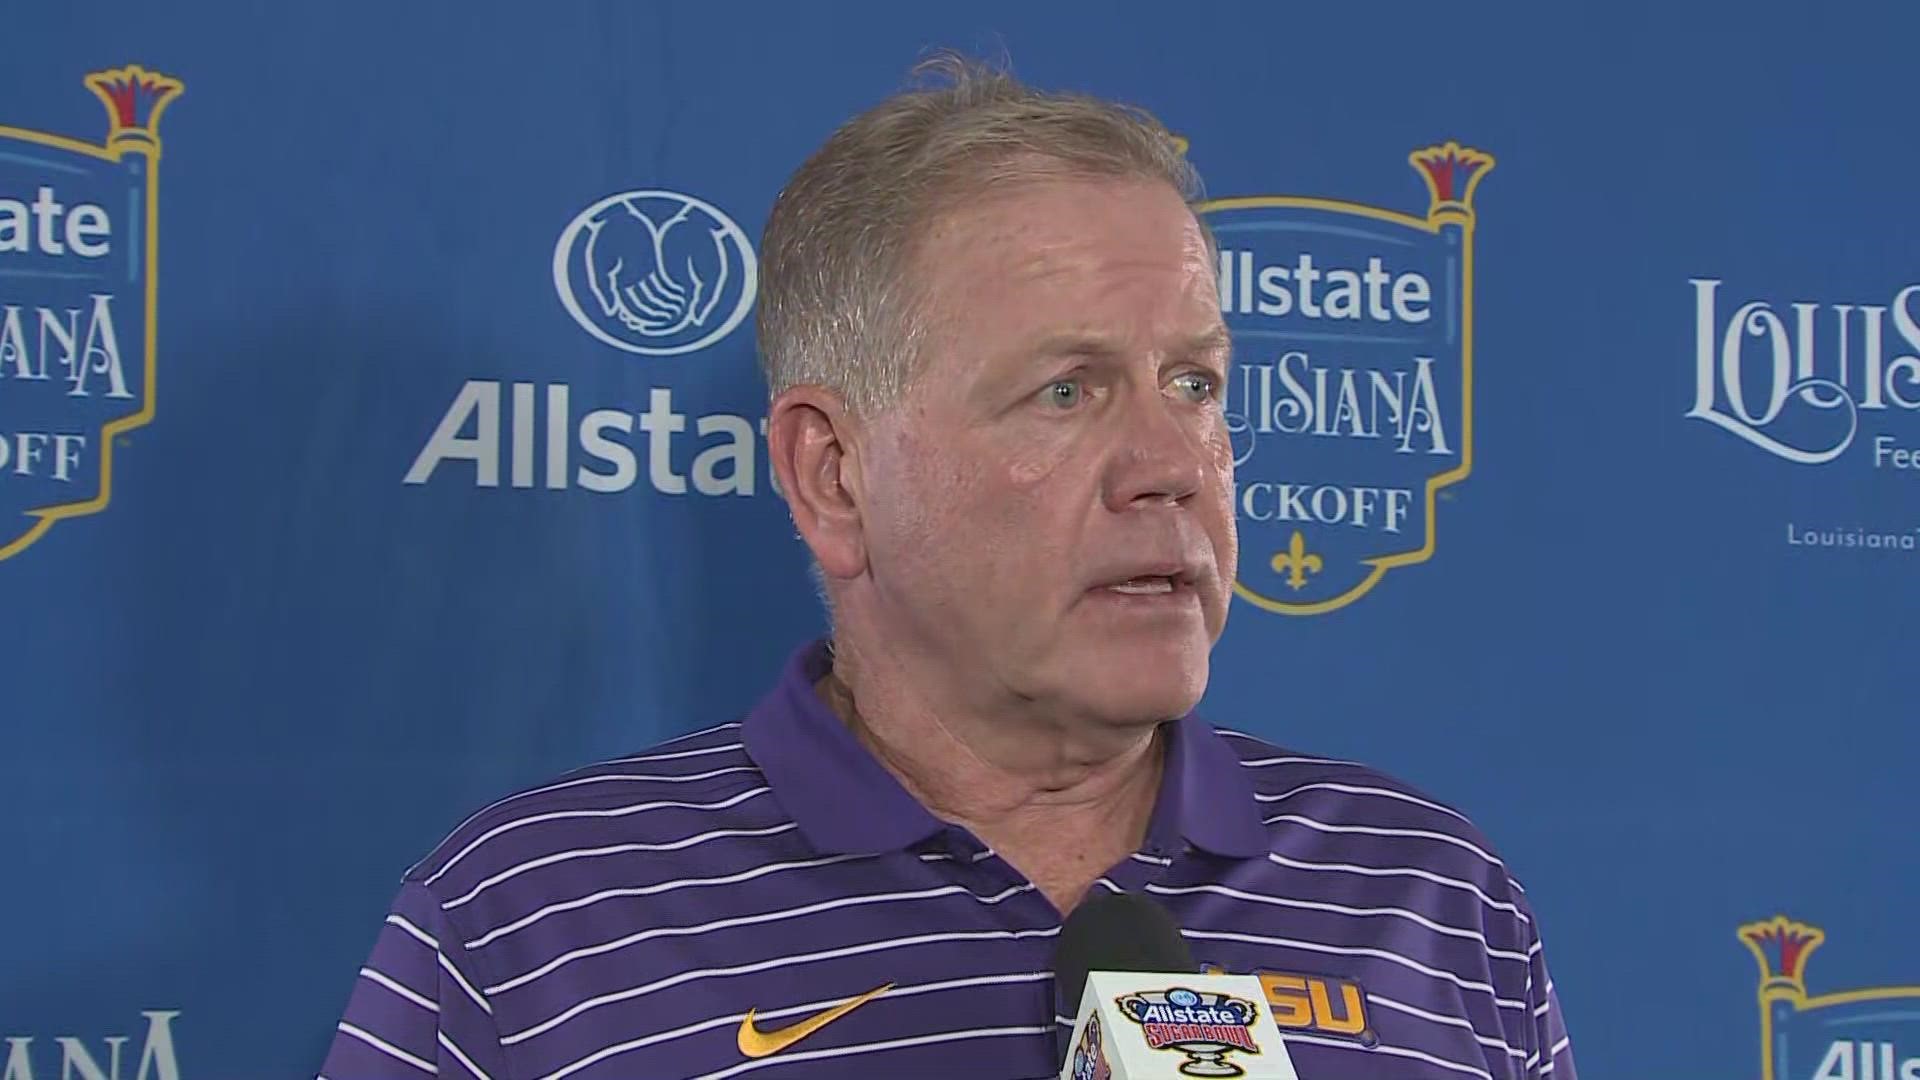 LSU head coach Brian Kelly talks about the team's shortcomings in the opening game loss to Florida State Sunday night.